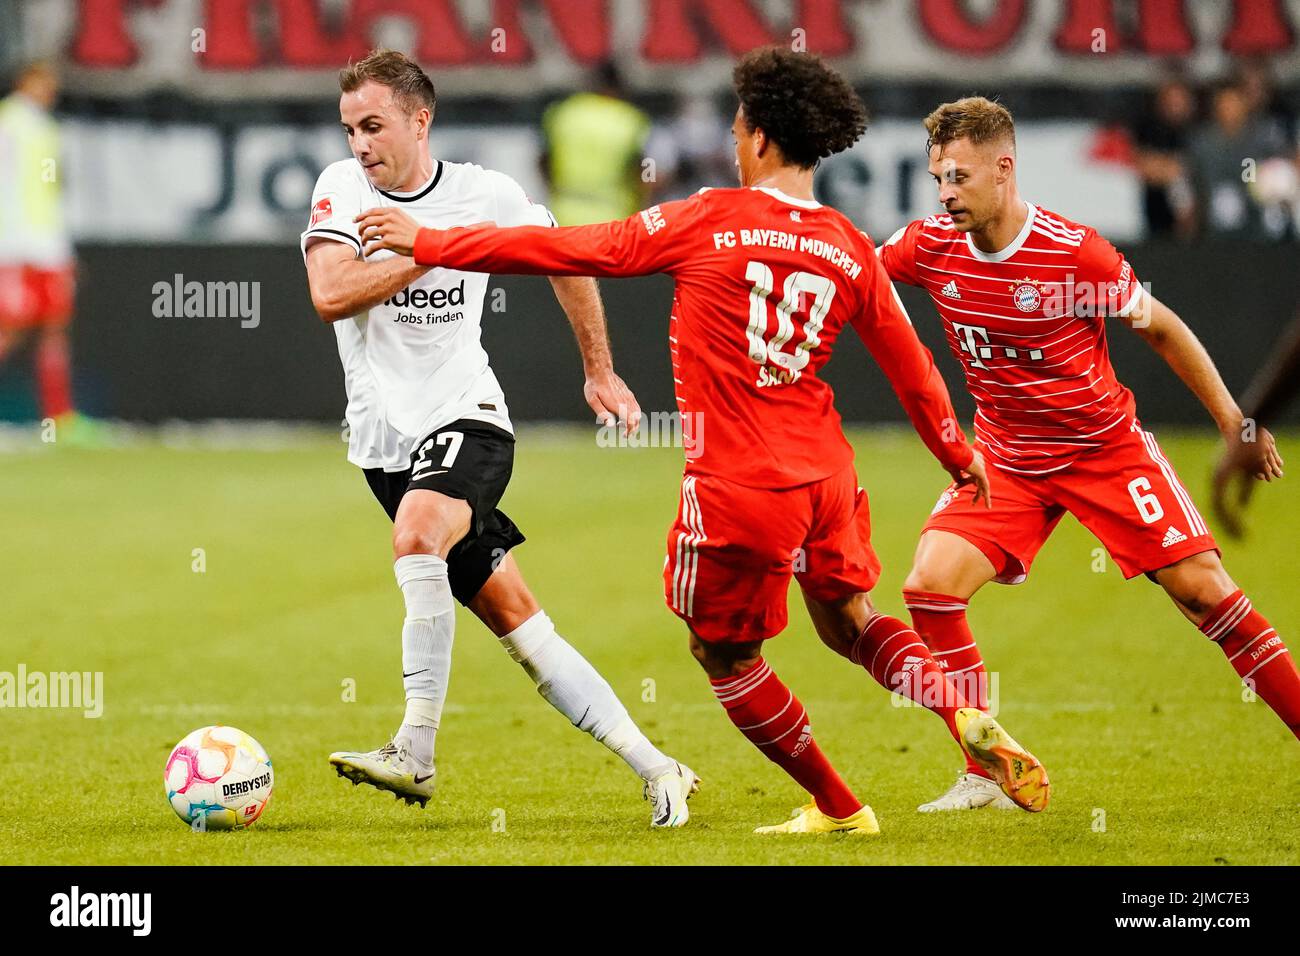 05 August 2022, Hessen, Frankfurt/Main: Soccer: Bundesliga, Eintracht Frankfurt - Bayern Munich, Matchday 1, Deutsche Bank Park. Frankfurt's Mario Götze (l) and Munich's Leroy Sane (m) and Joshua Kimmich fight for the ball. Photo: Uwe Anspach/dpa - IMPORTANT NOTE: In accordance with the requirements of the DFL Deutsche Fußball Liga and the DFB Deutscher Fußball-Bund, it is prohibited to use or have used photographs taken in the stadium and/or of the match in the form of sequence pictures and/or video-like photo series. Stock Photo